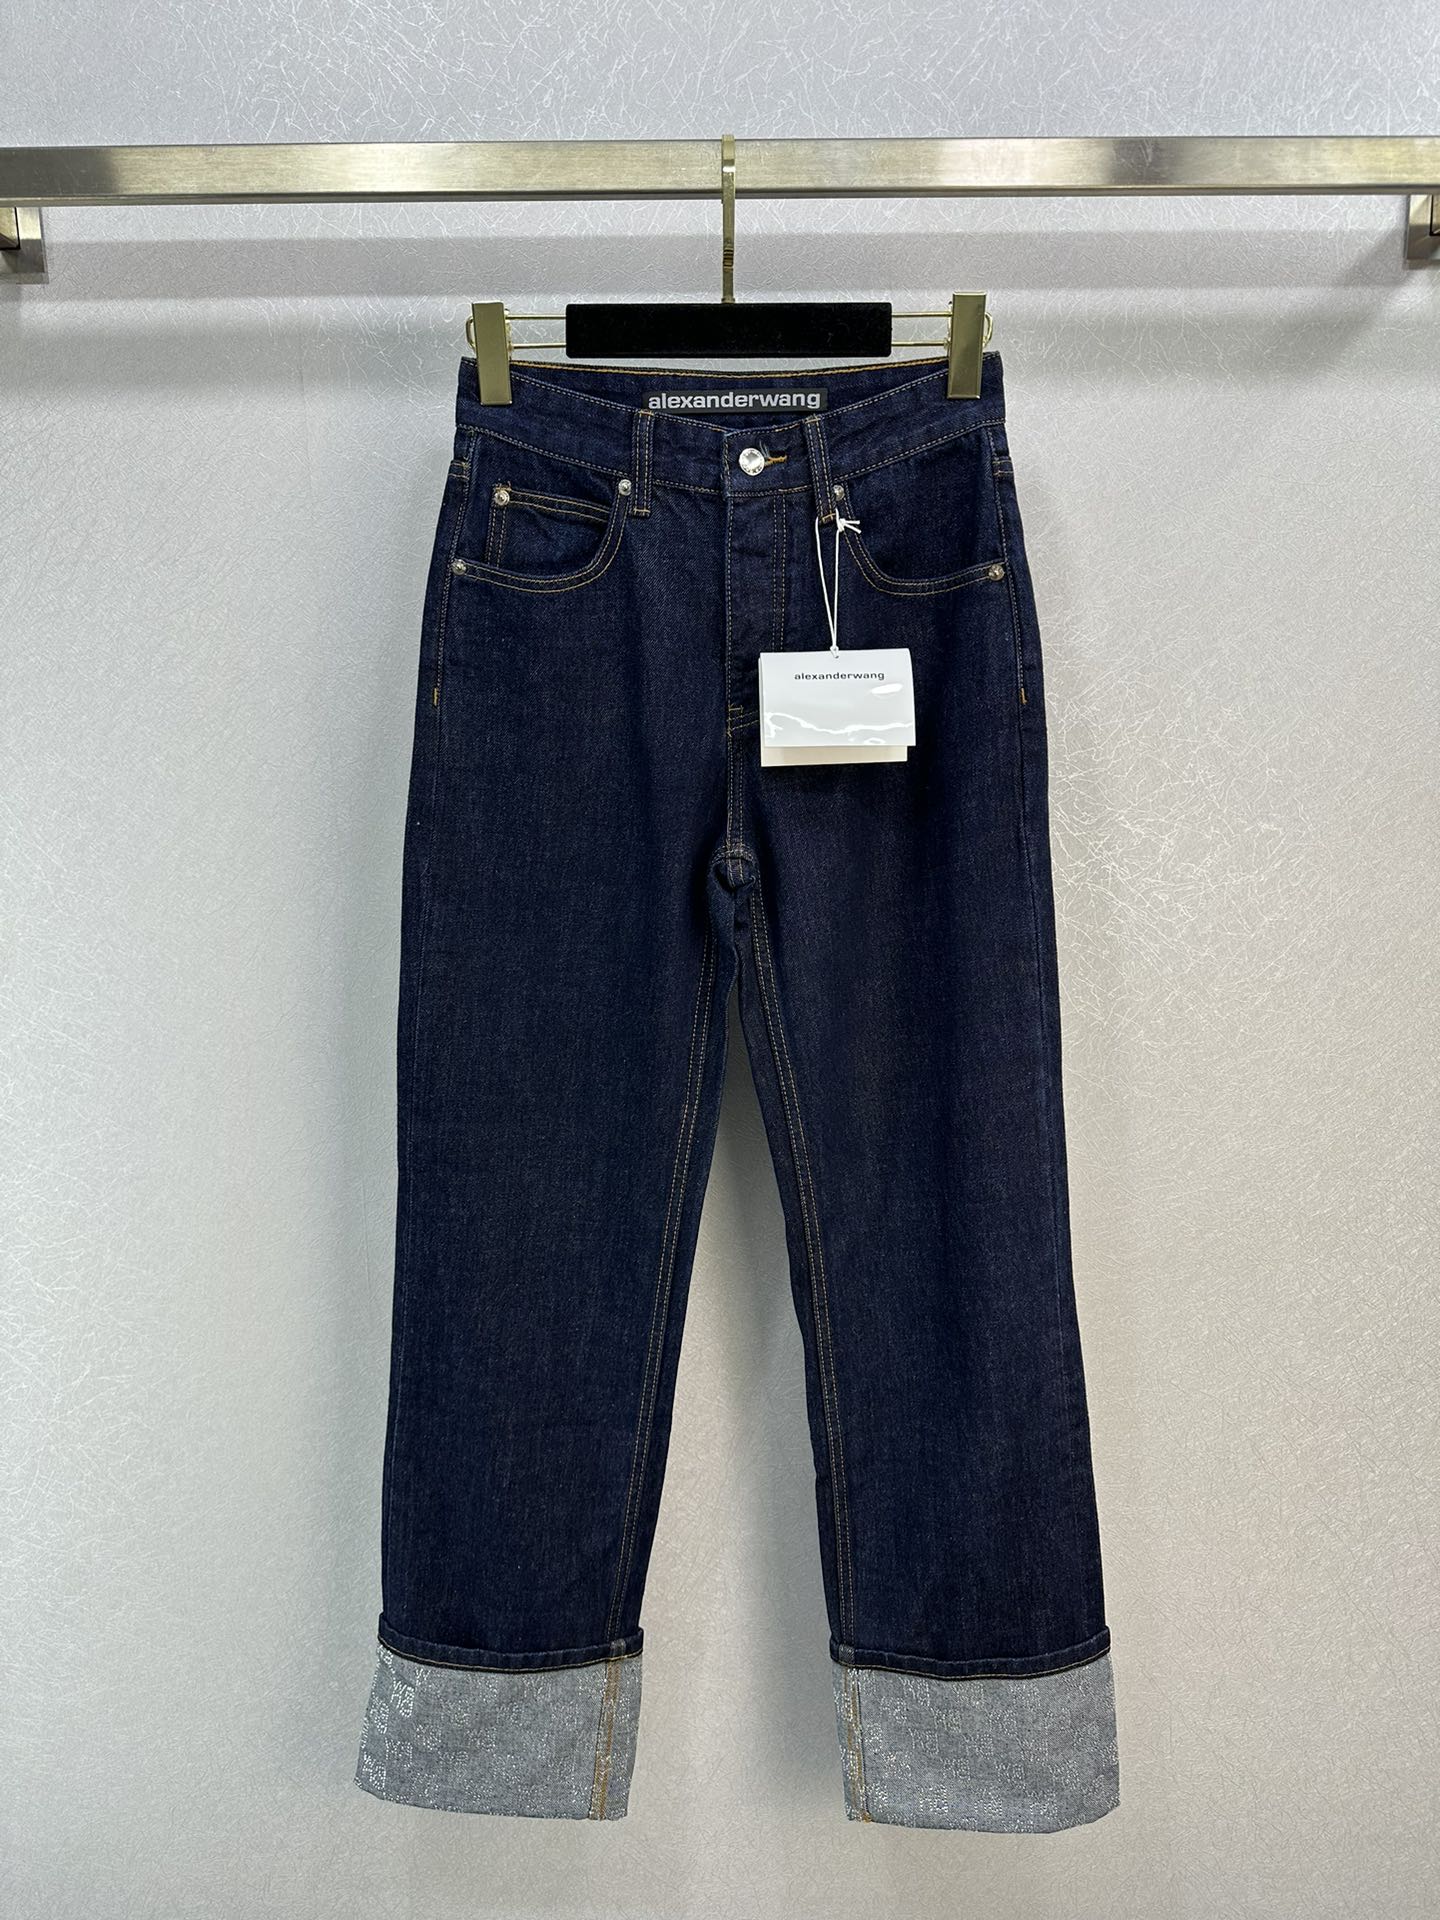 Alexander Wang Clothing Jeans Blue Fall/Winter Collection